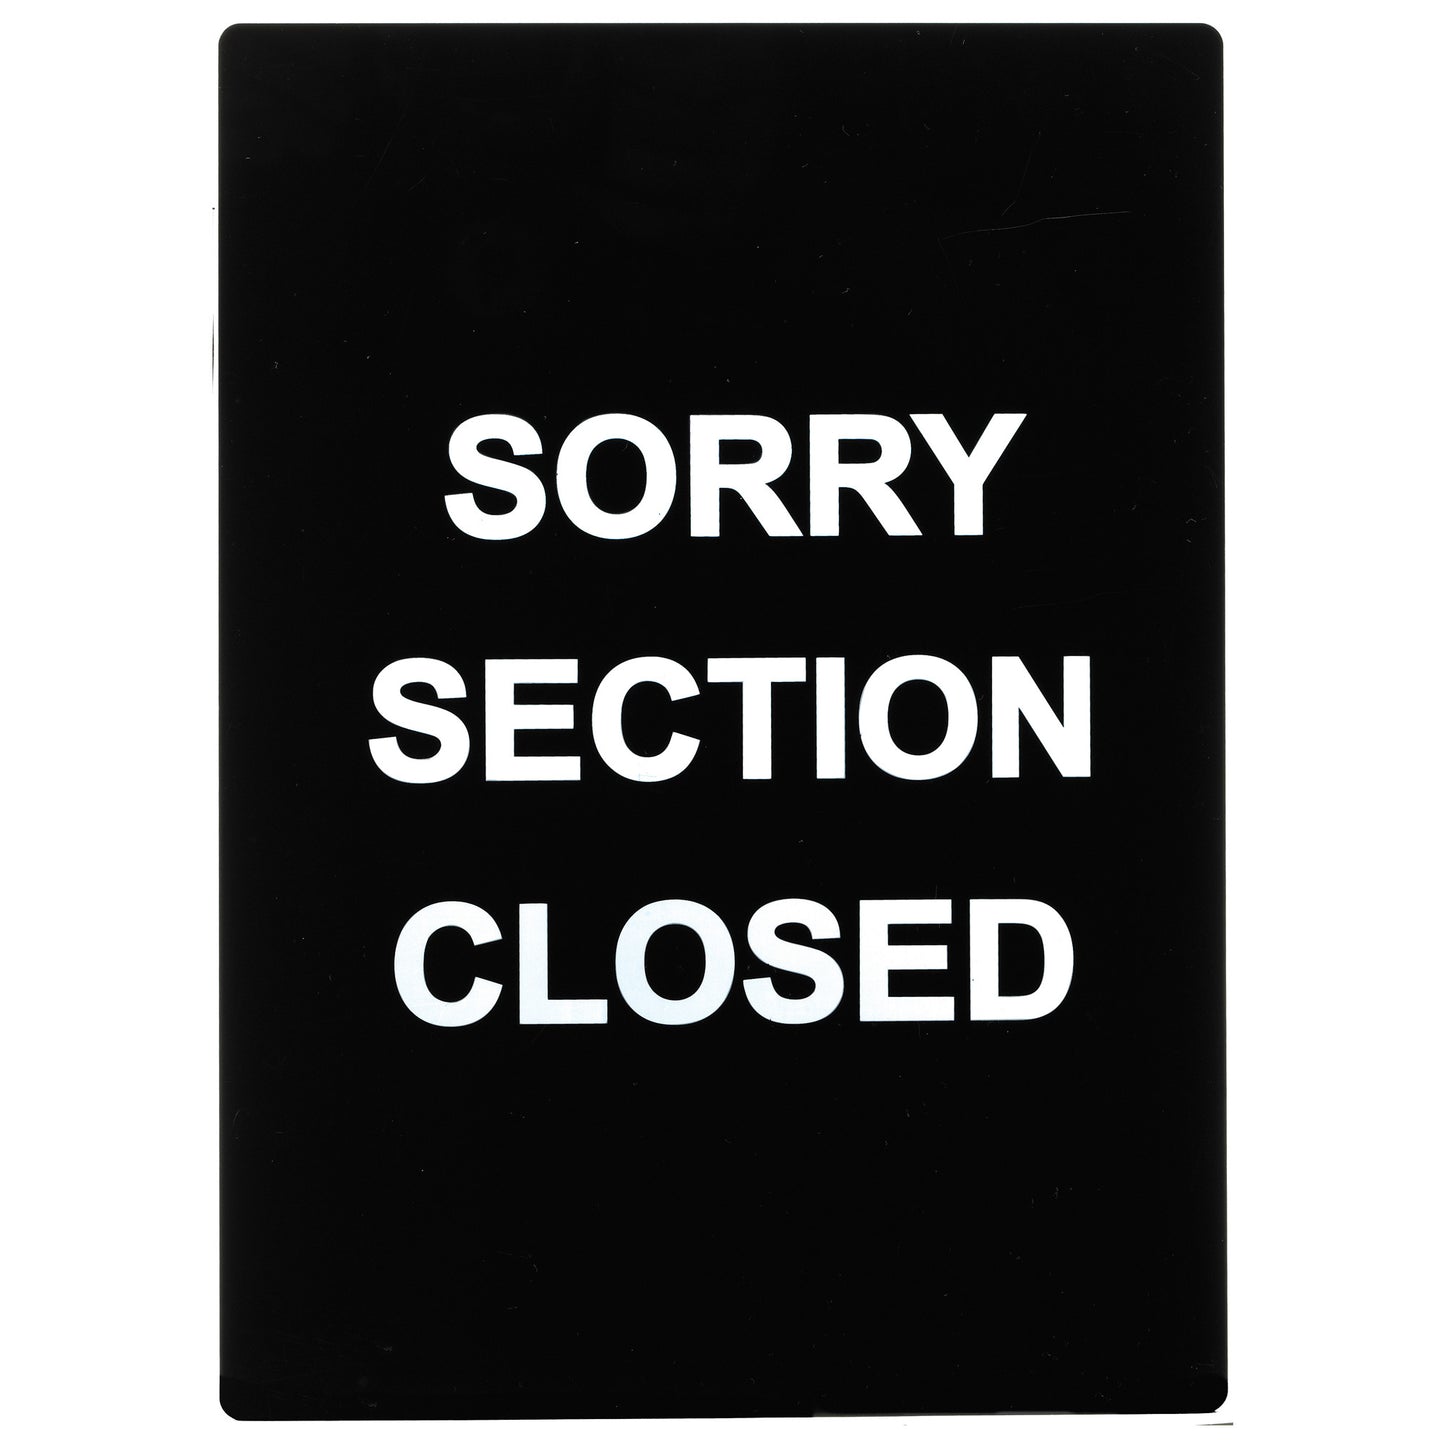 SGN-804 - Stanchion Frame Sign - SGN-804 - Sorry Section Closed